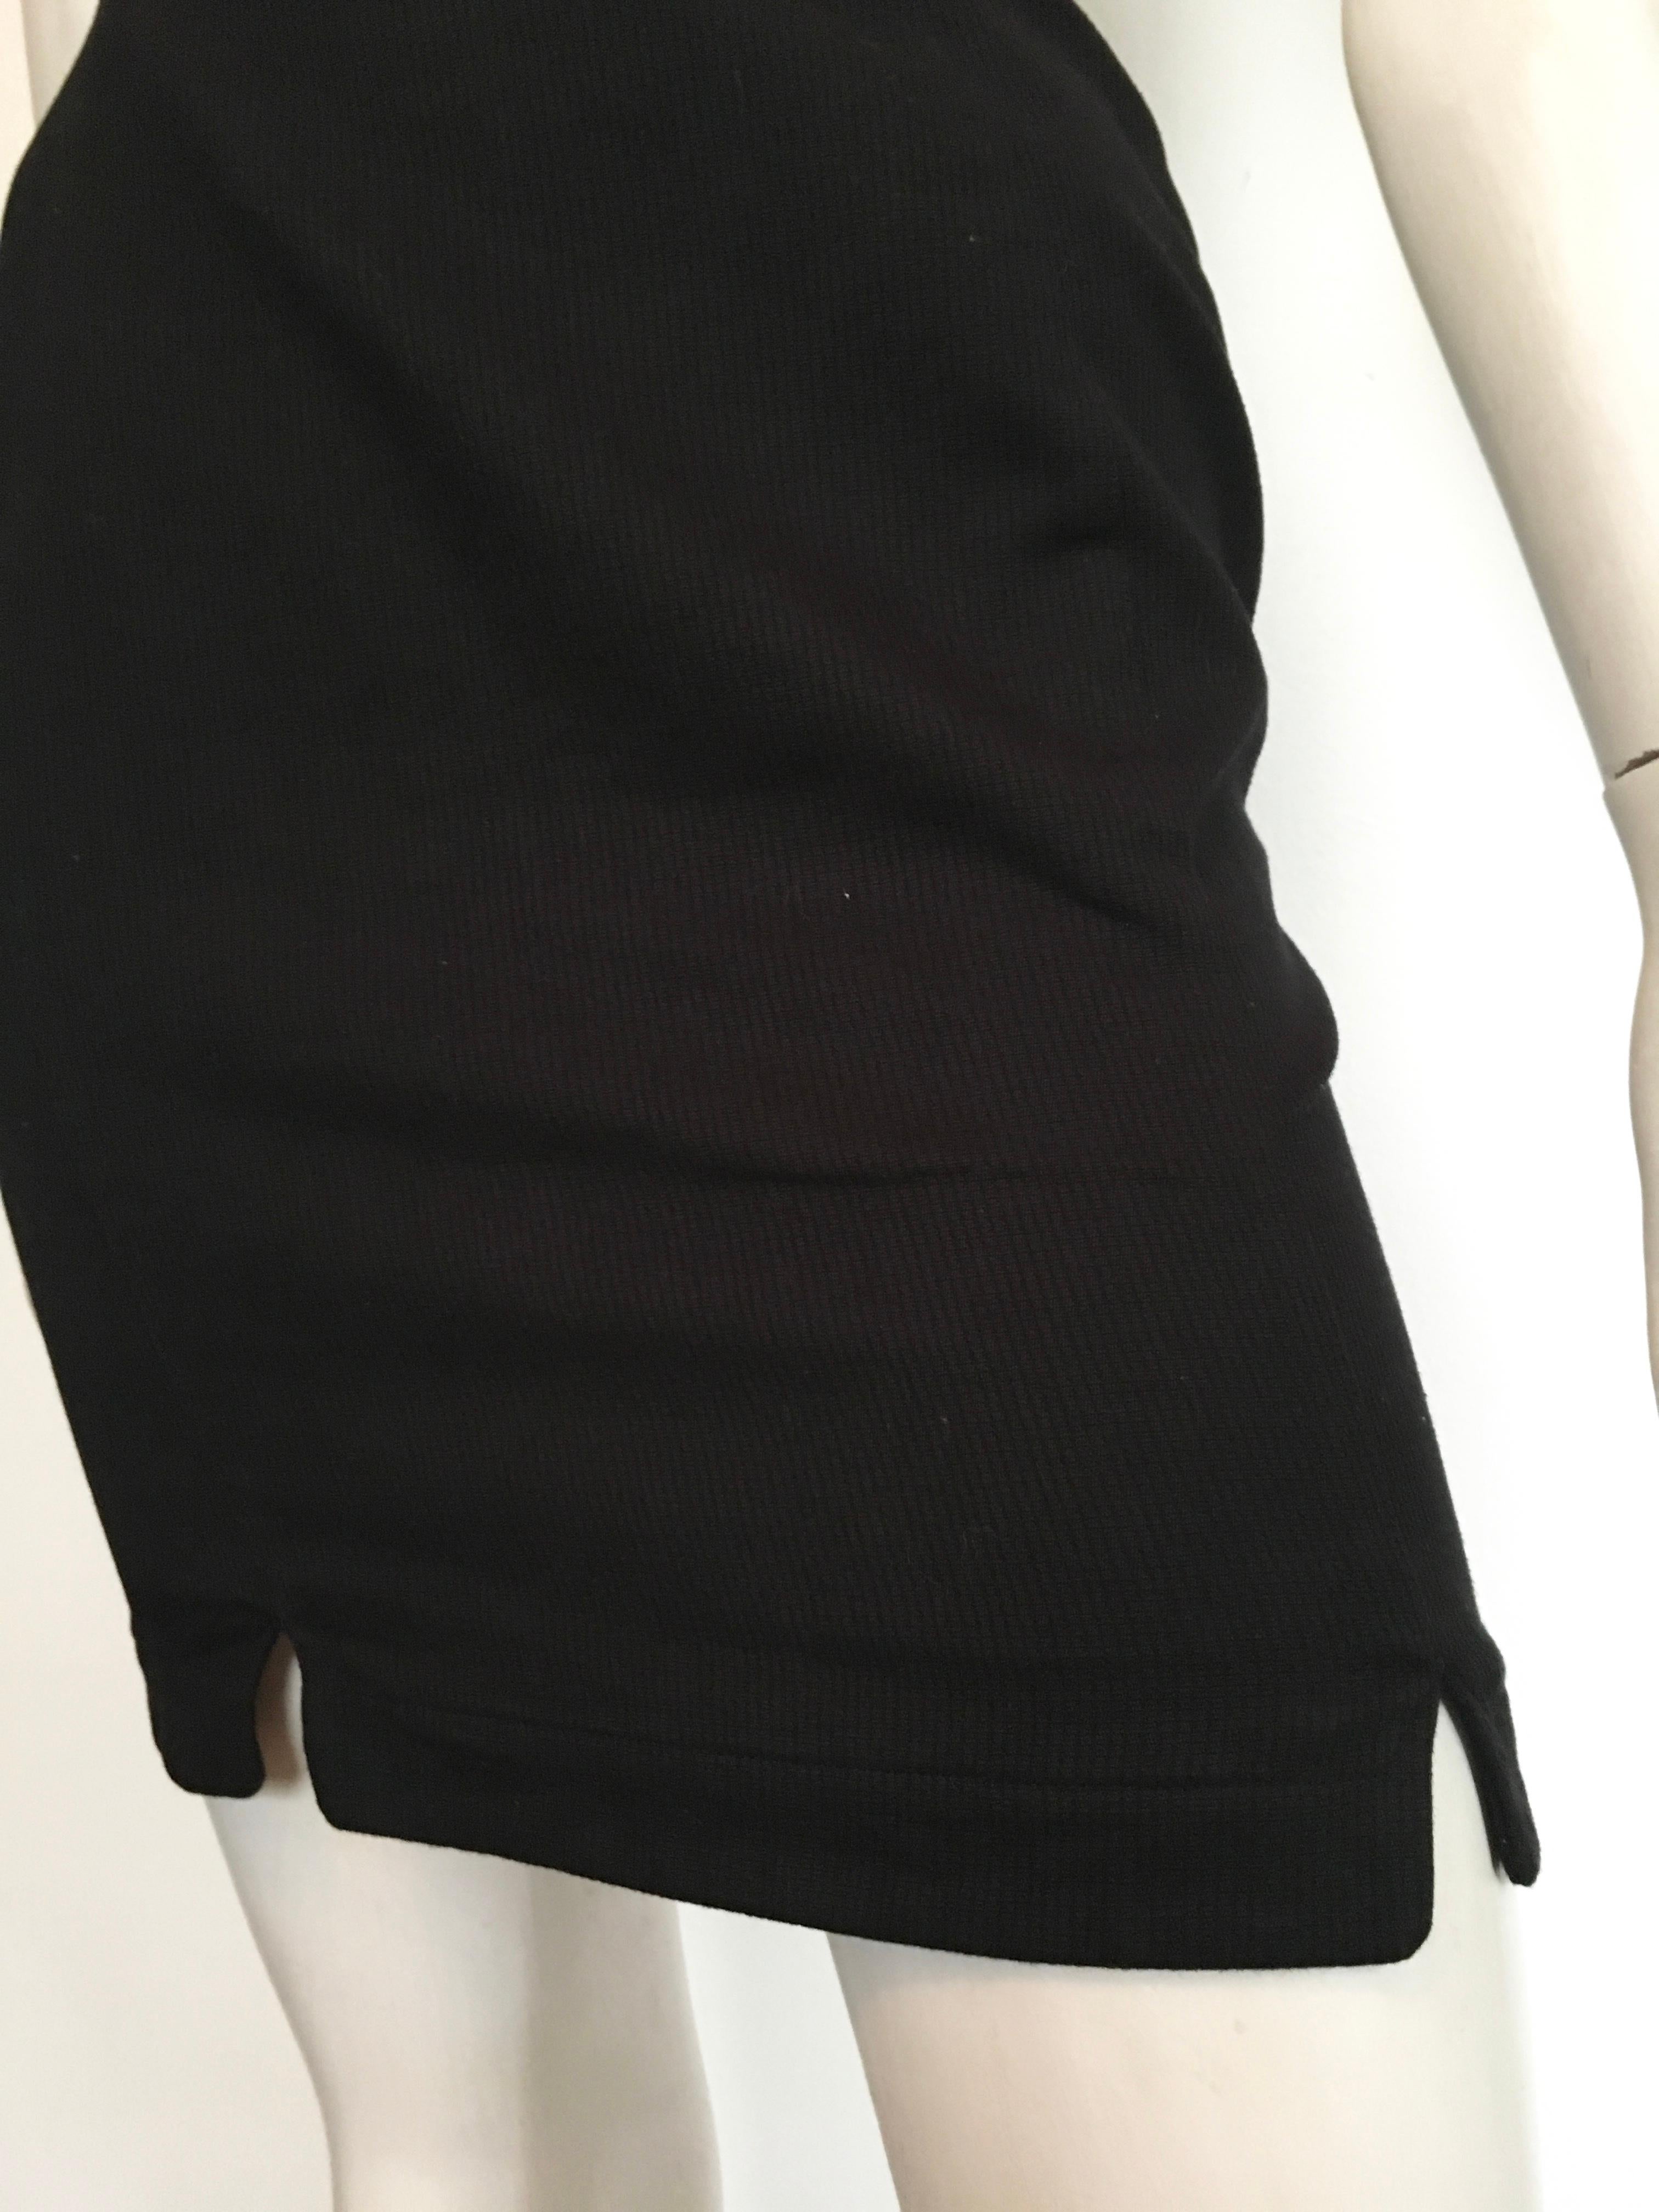 Thierry Mugler 1990s Black Cotton Short Skirt Size 2. In Excellent Condition For Sale In Atlanta, GA